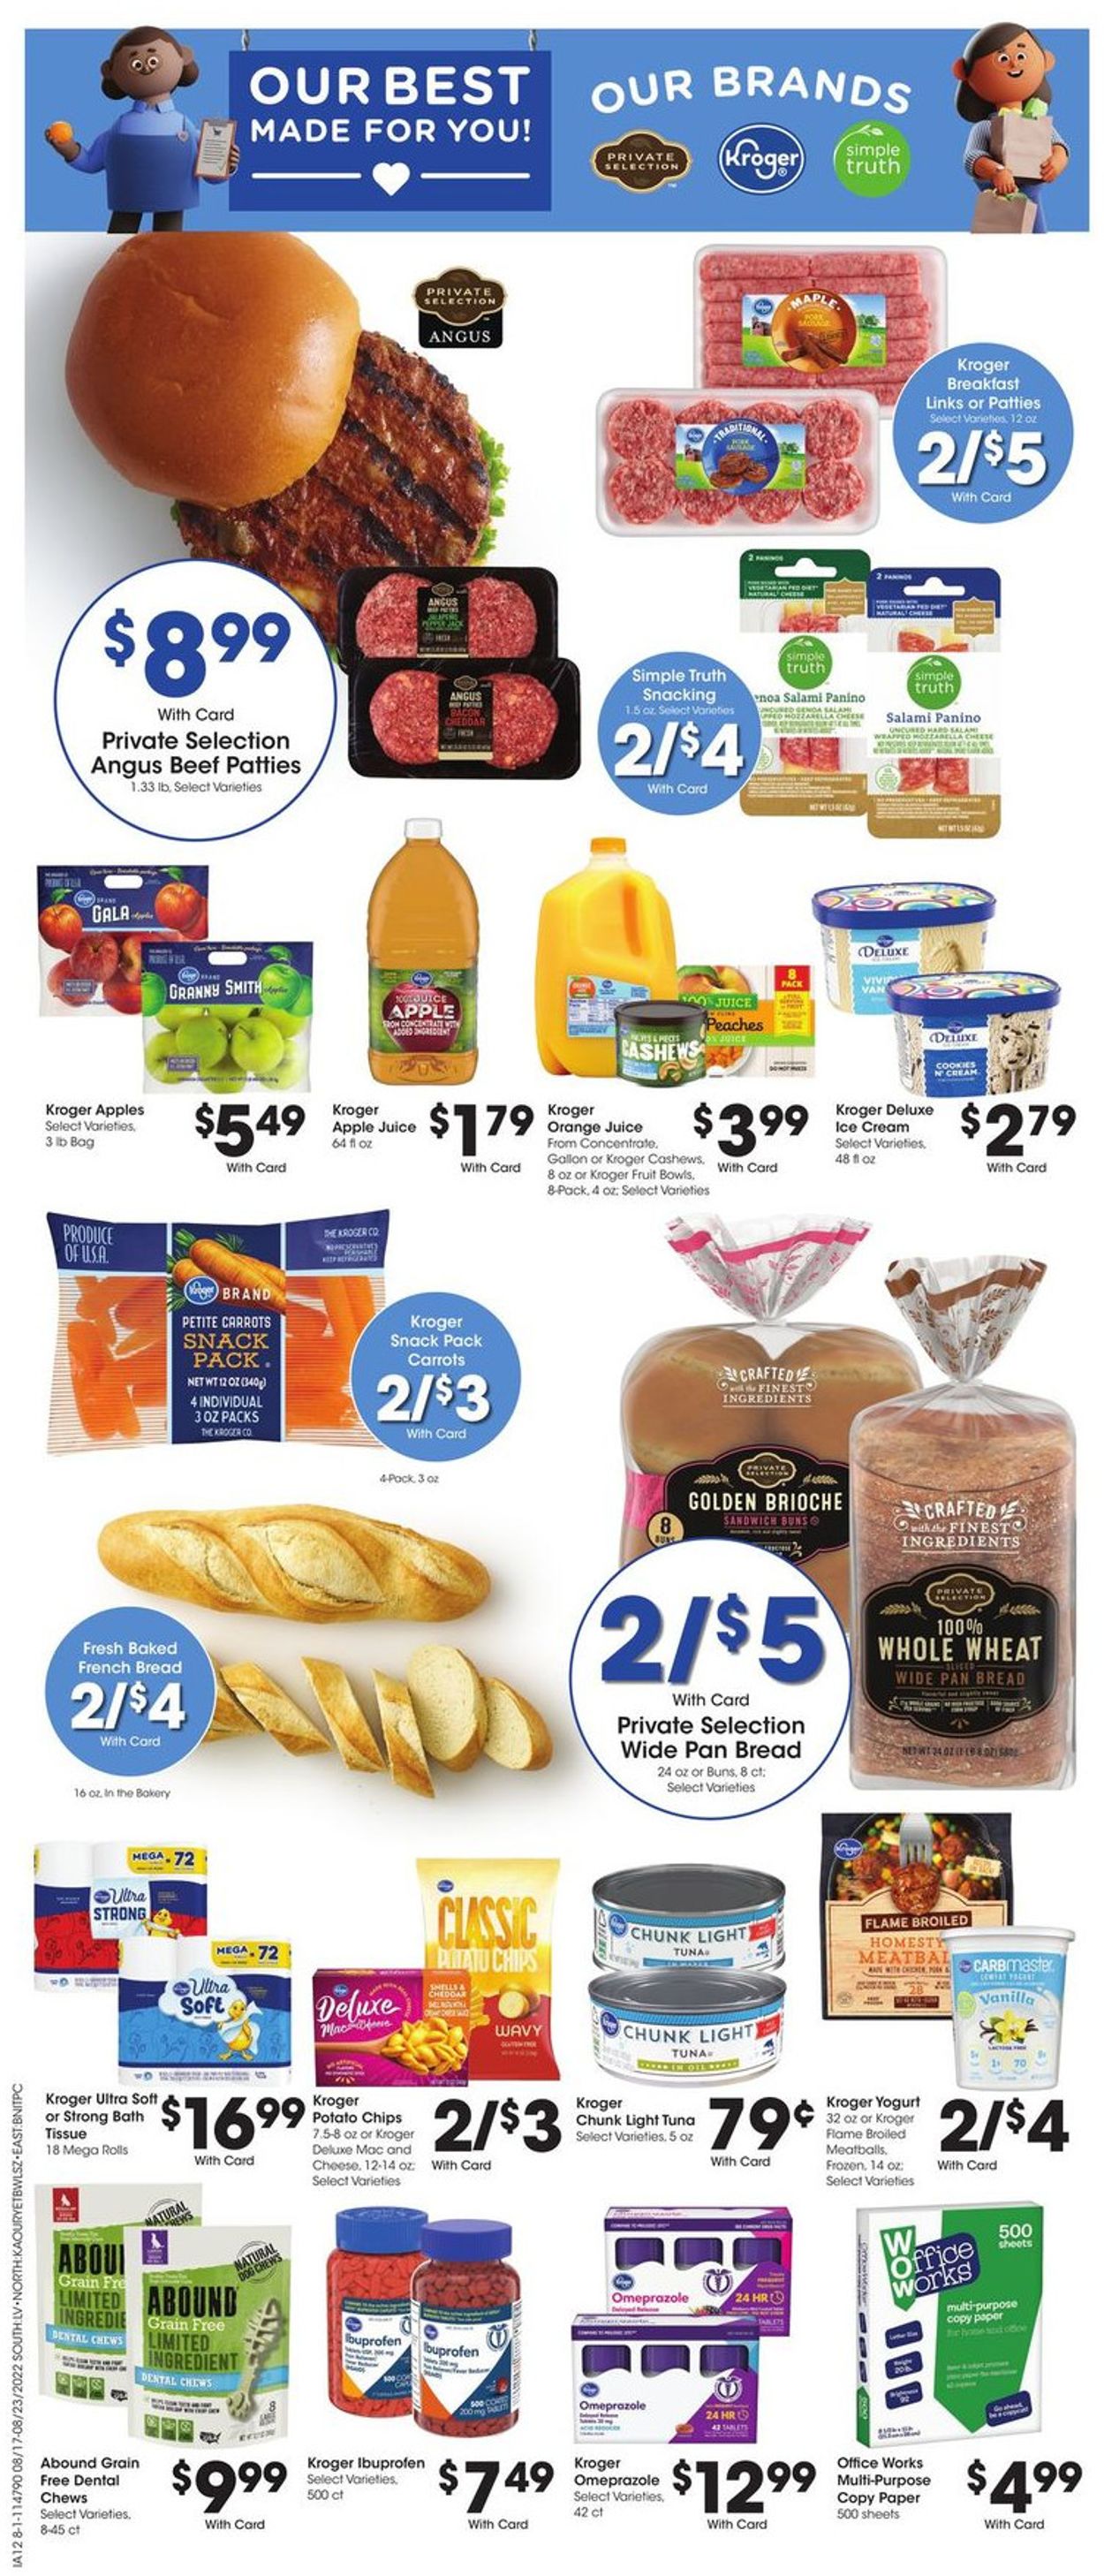 Fred Meyer Weekly Ad Circular - valid 08/17-08/23/2022 (Page 14)